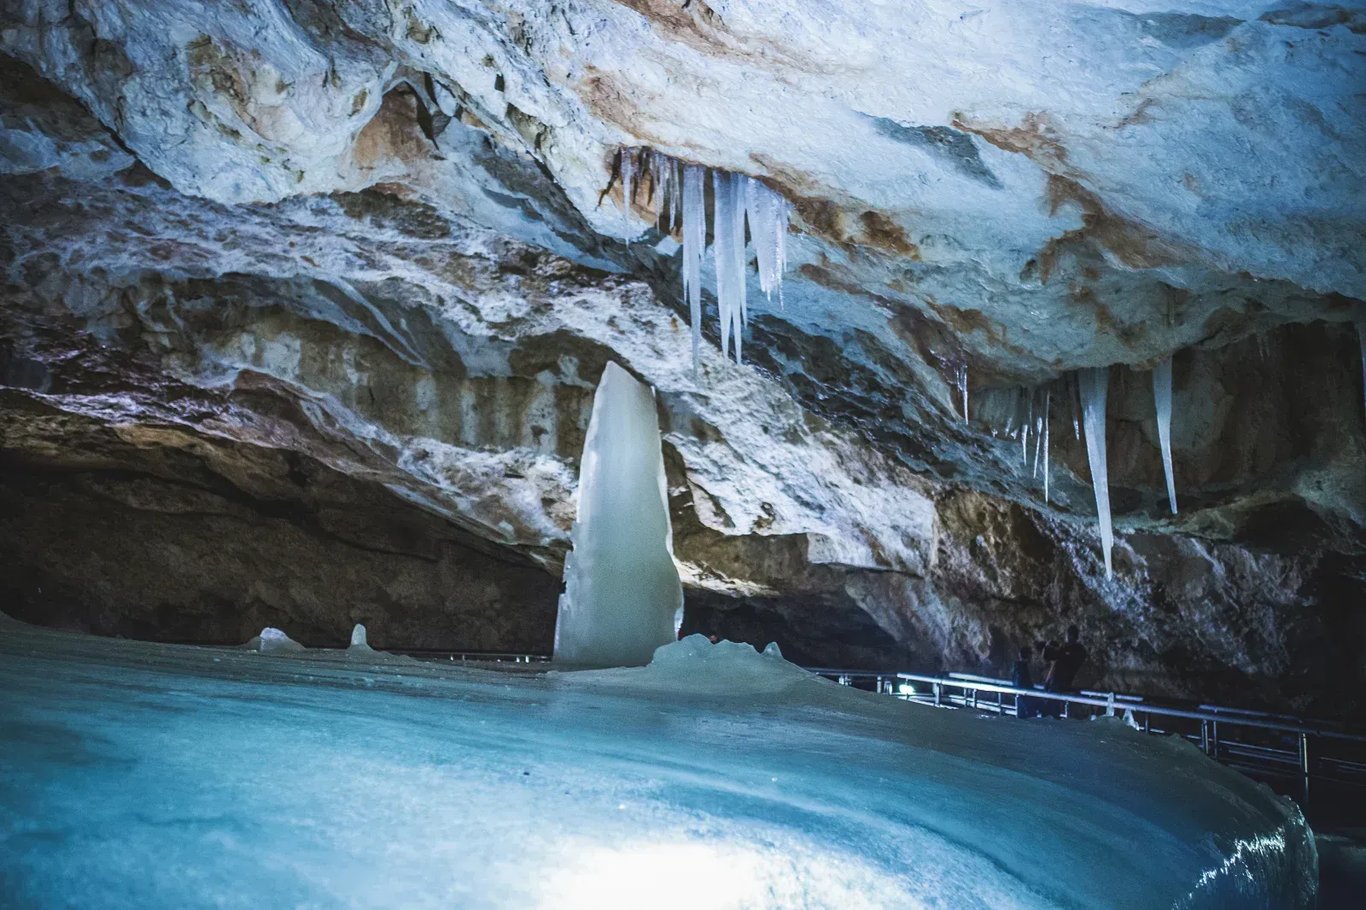 Dobsina Ice Cave Guide - Opening hours, parking, formation